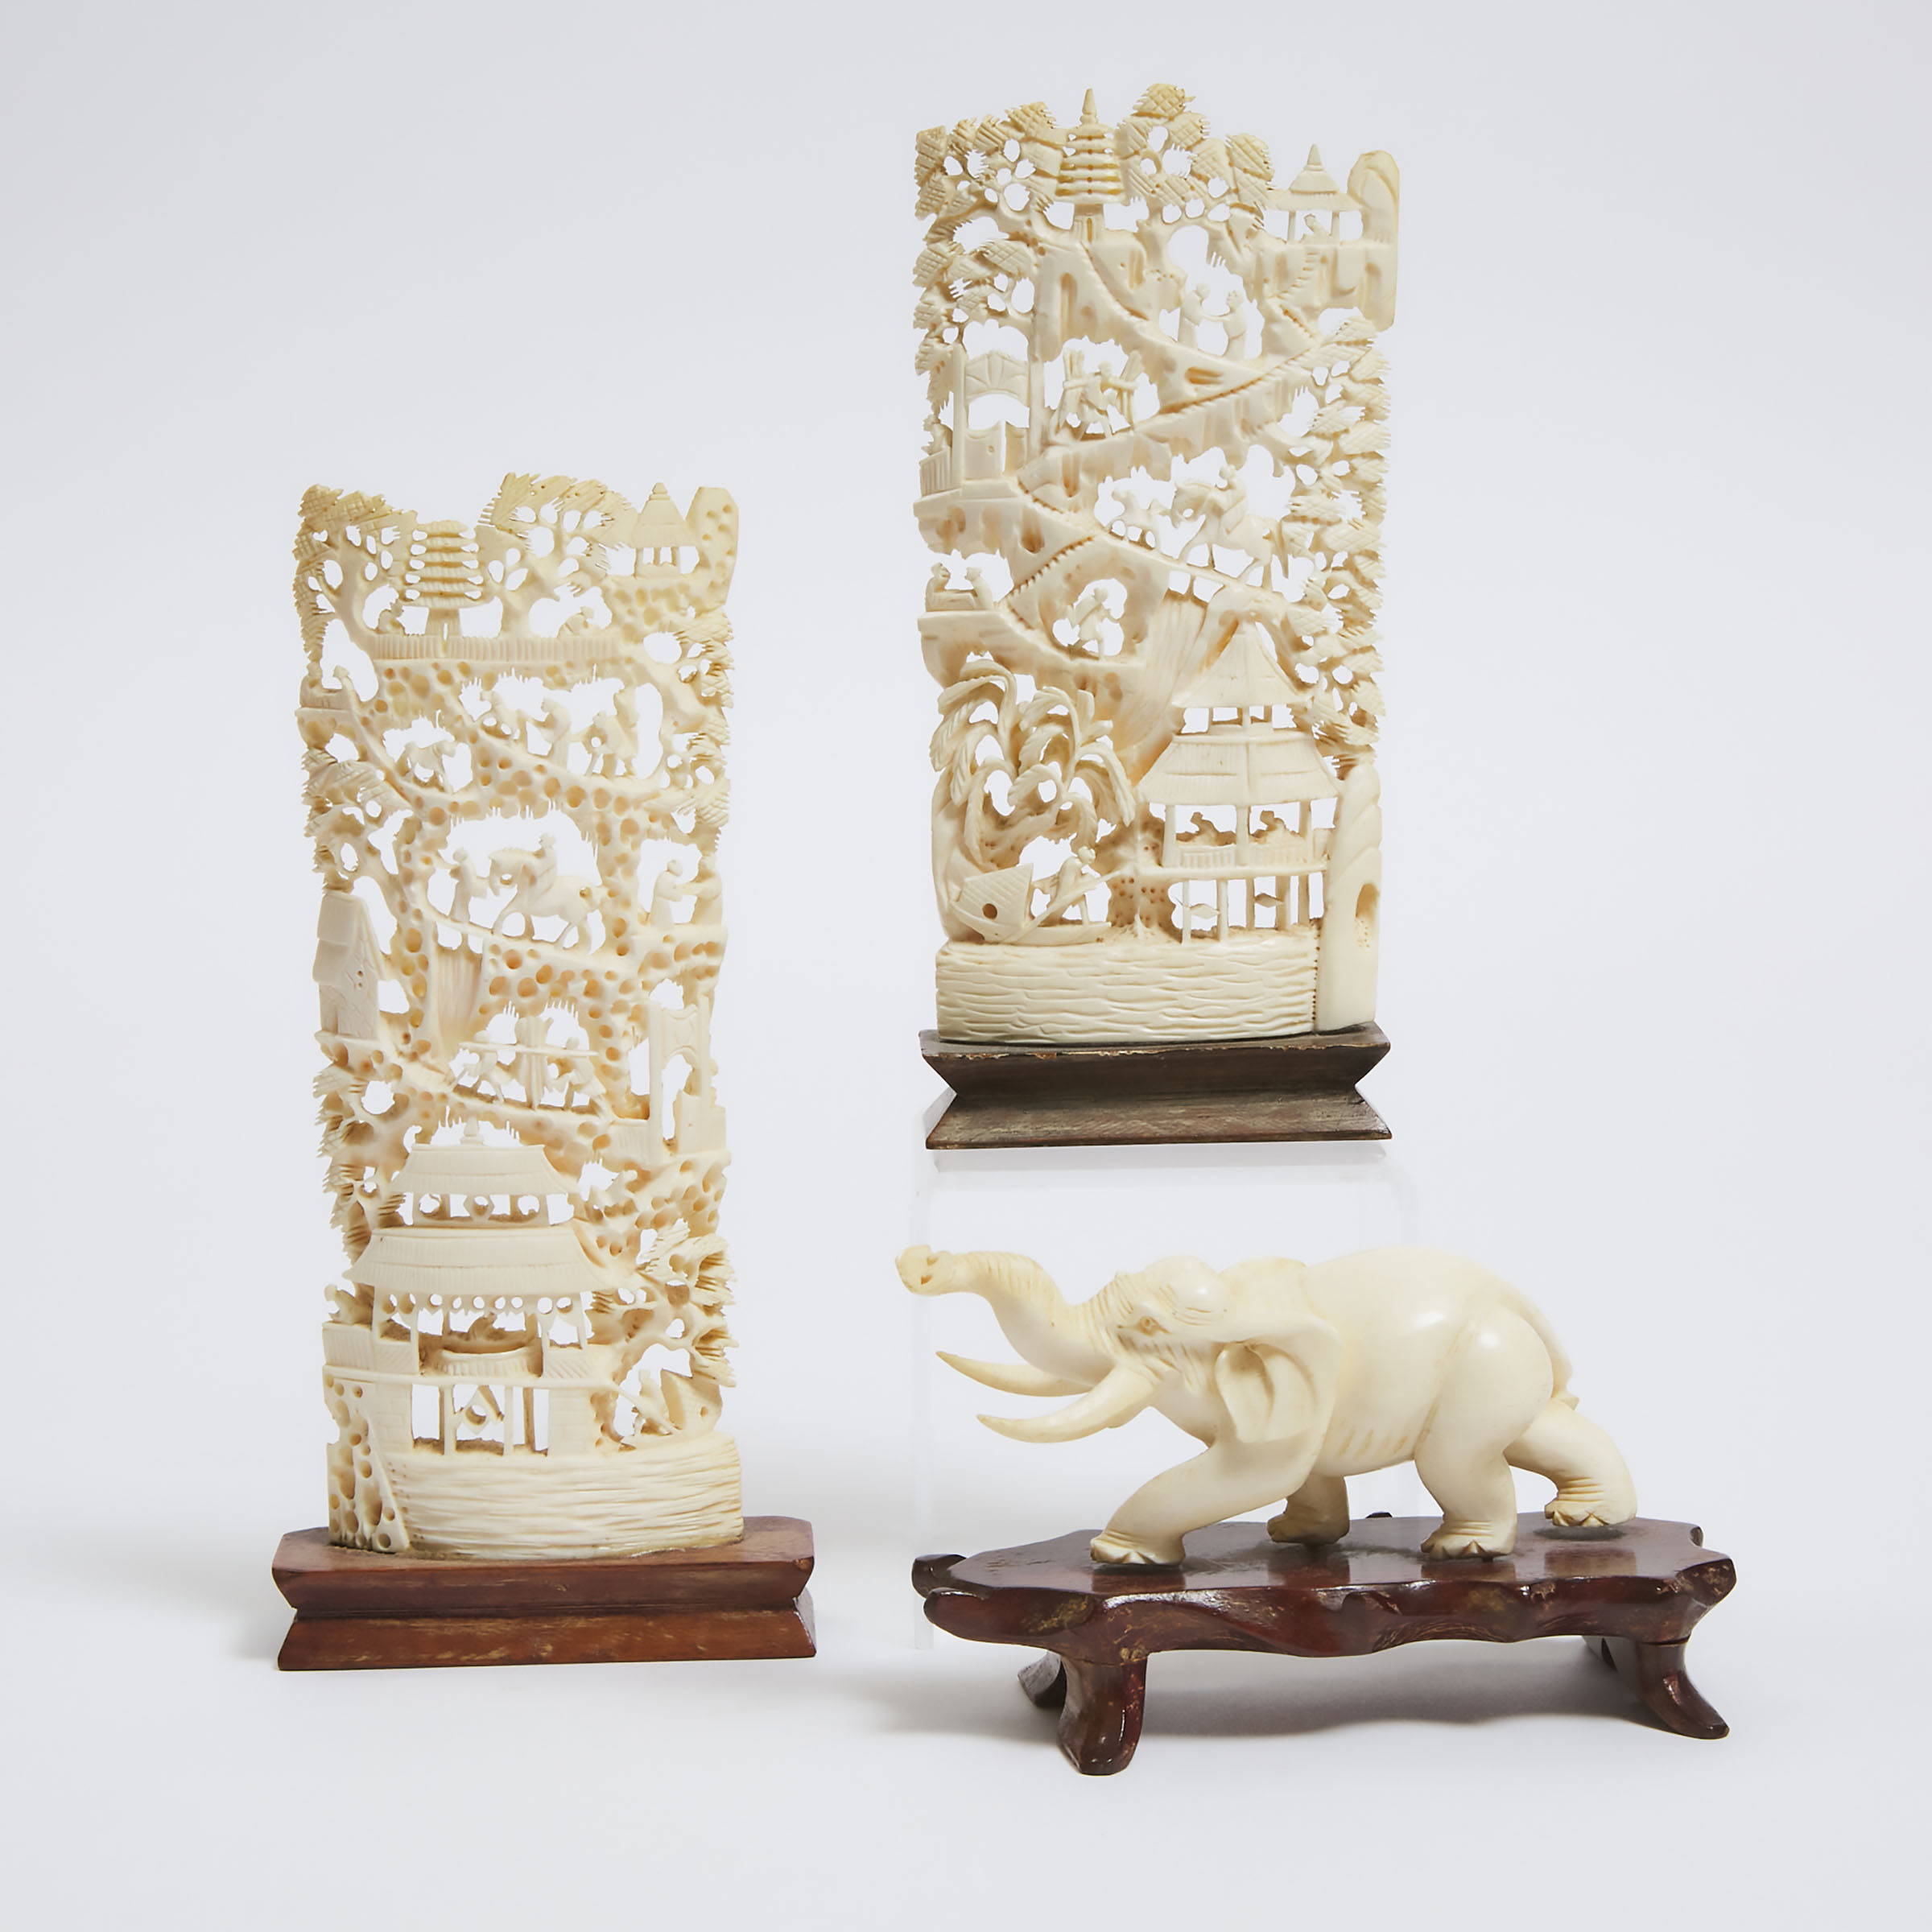 Two Chinese Ivory Landscape Carvings, Together With an Elephant